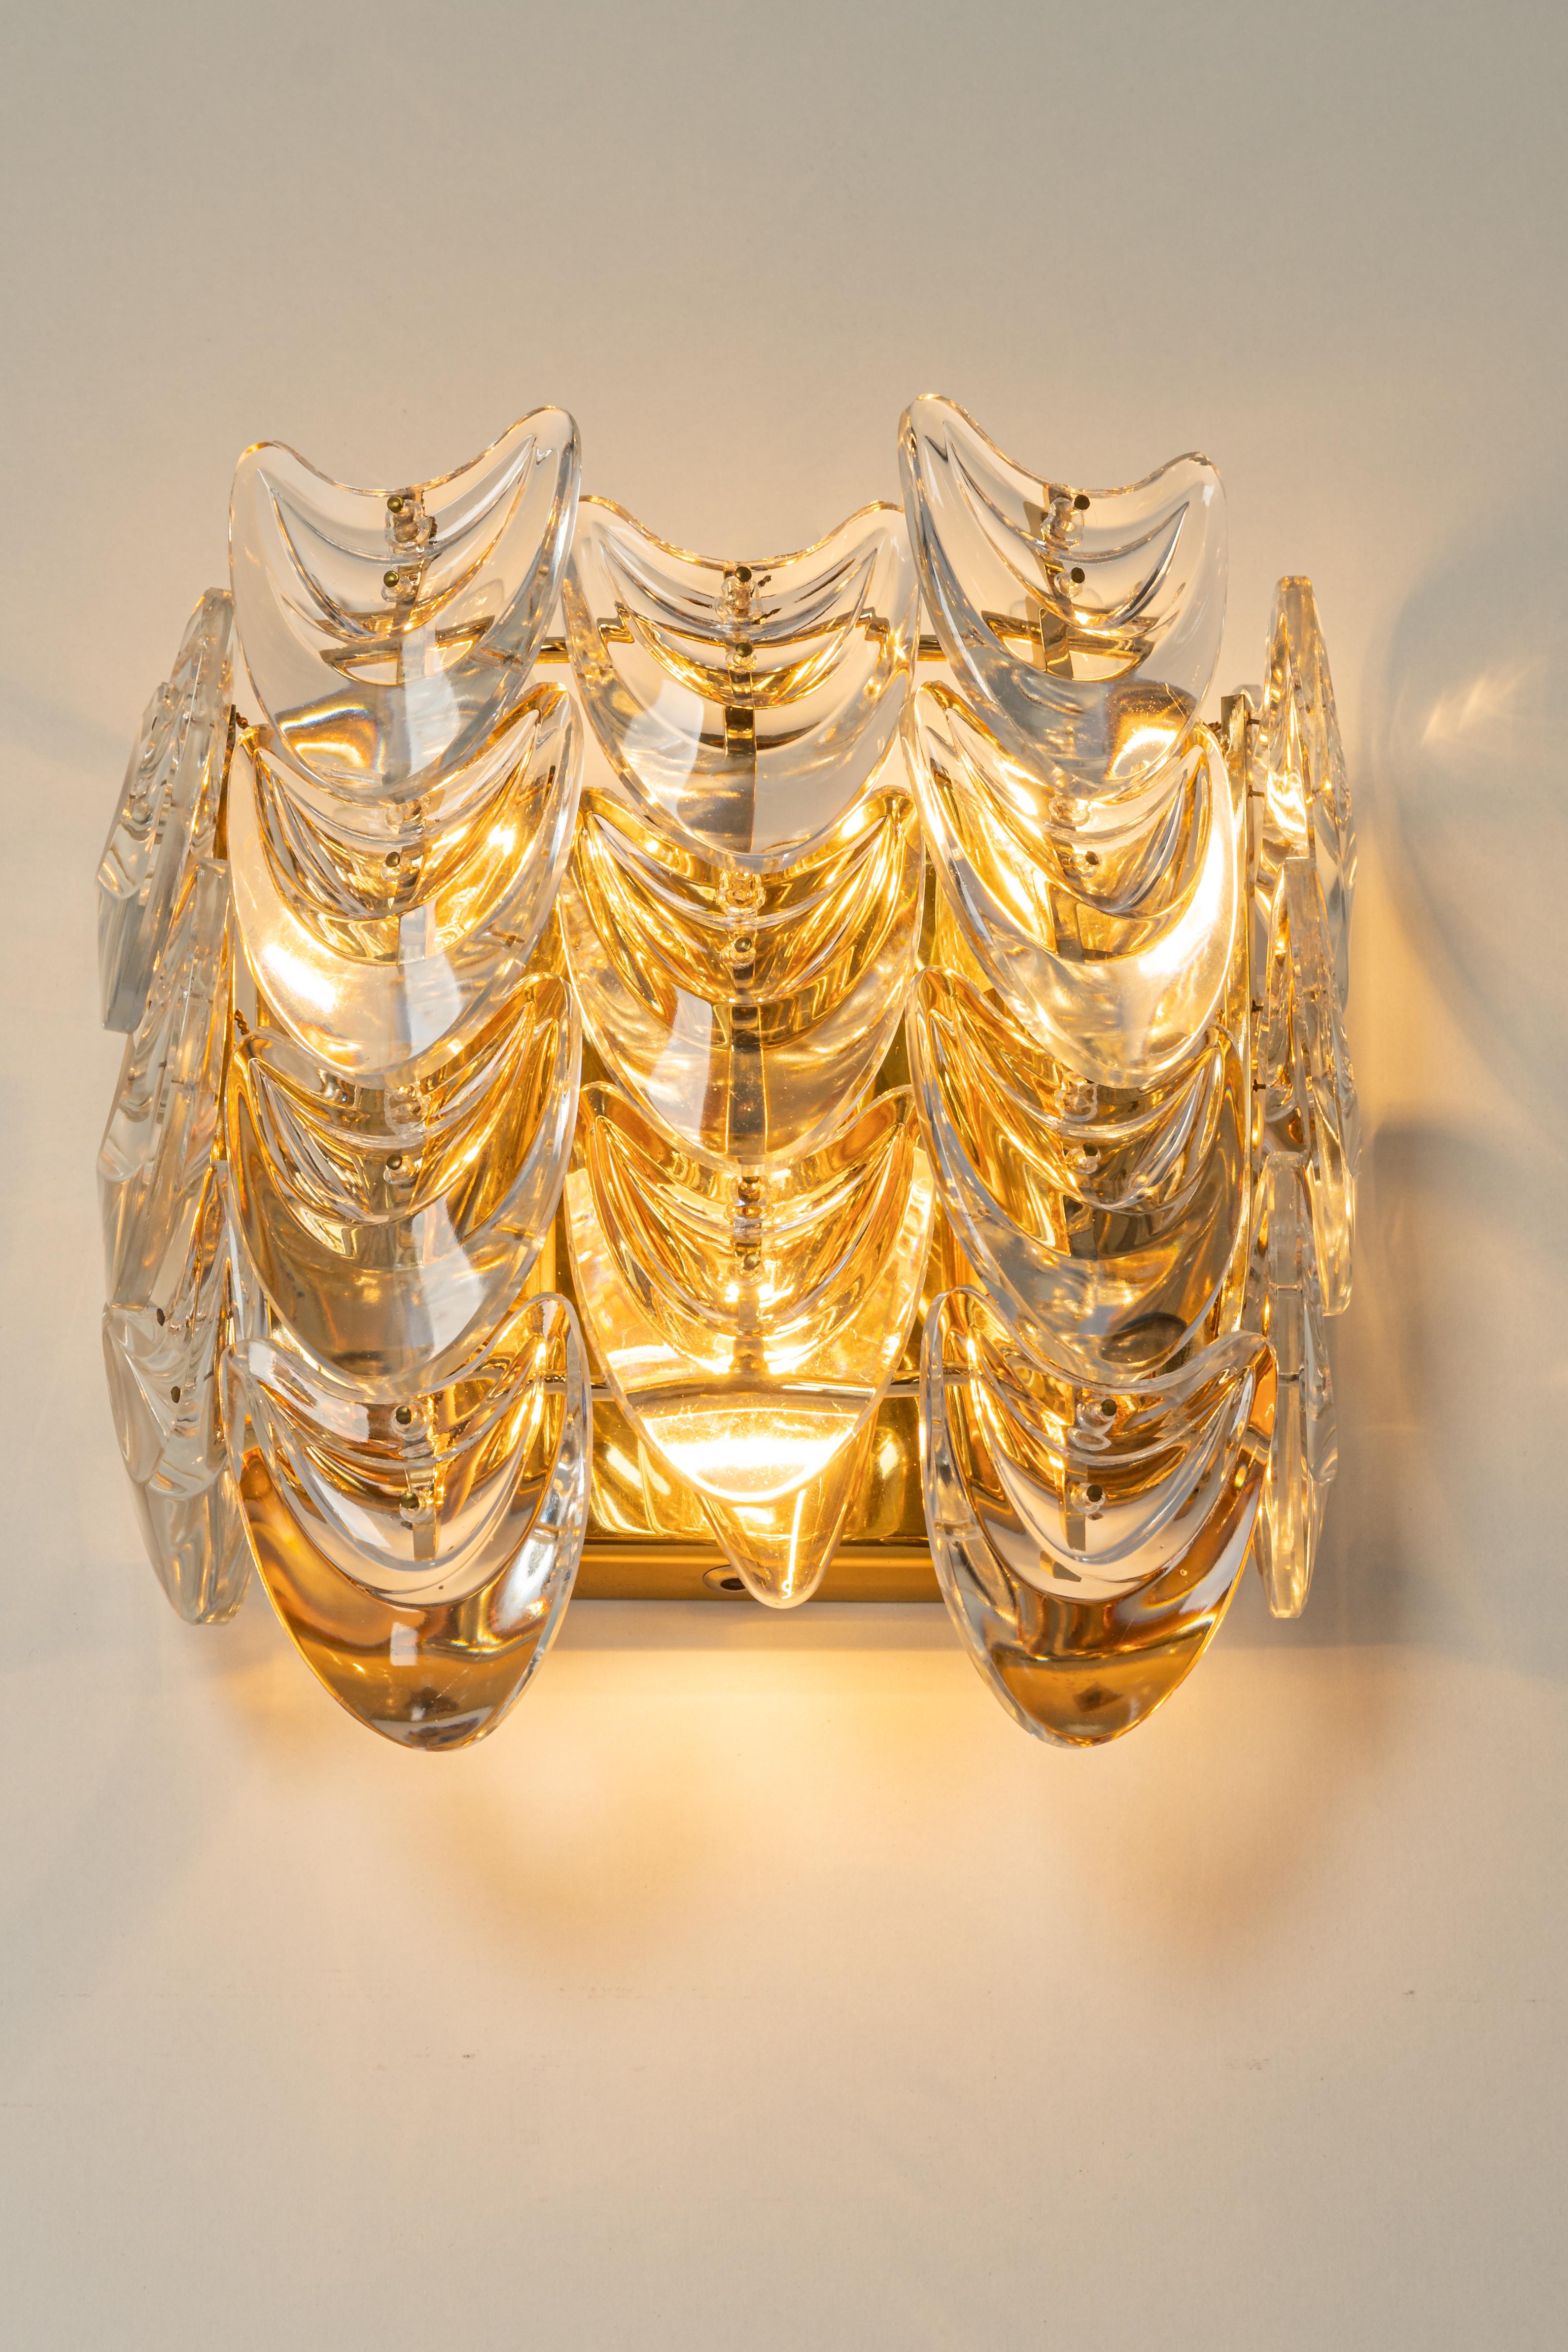 Pair of Gilded Brass Crystal Wall Lights, Sciolari Design, Palwa, Germany, 1960s For Sale 3